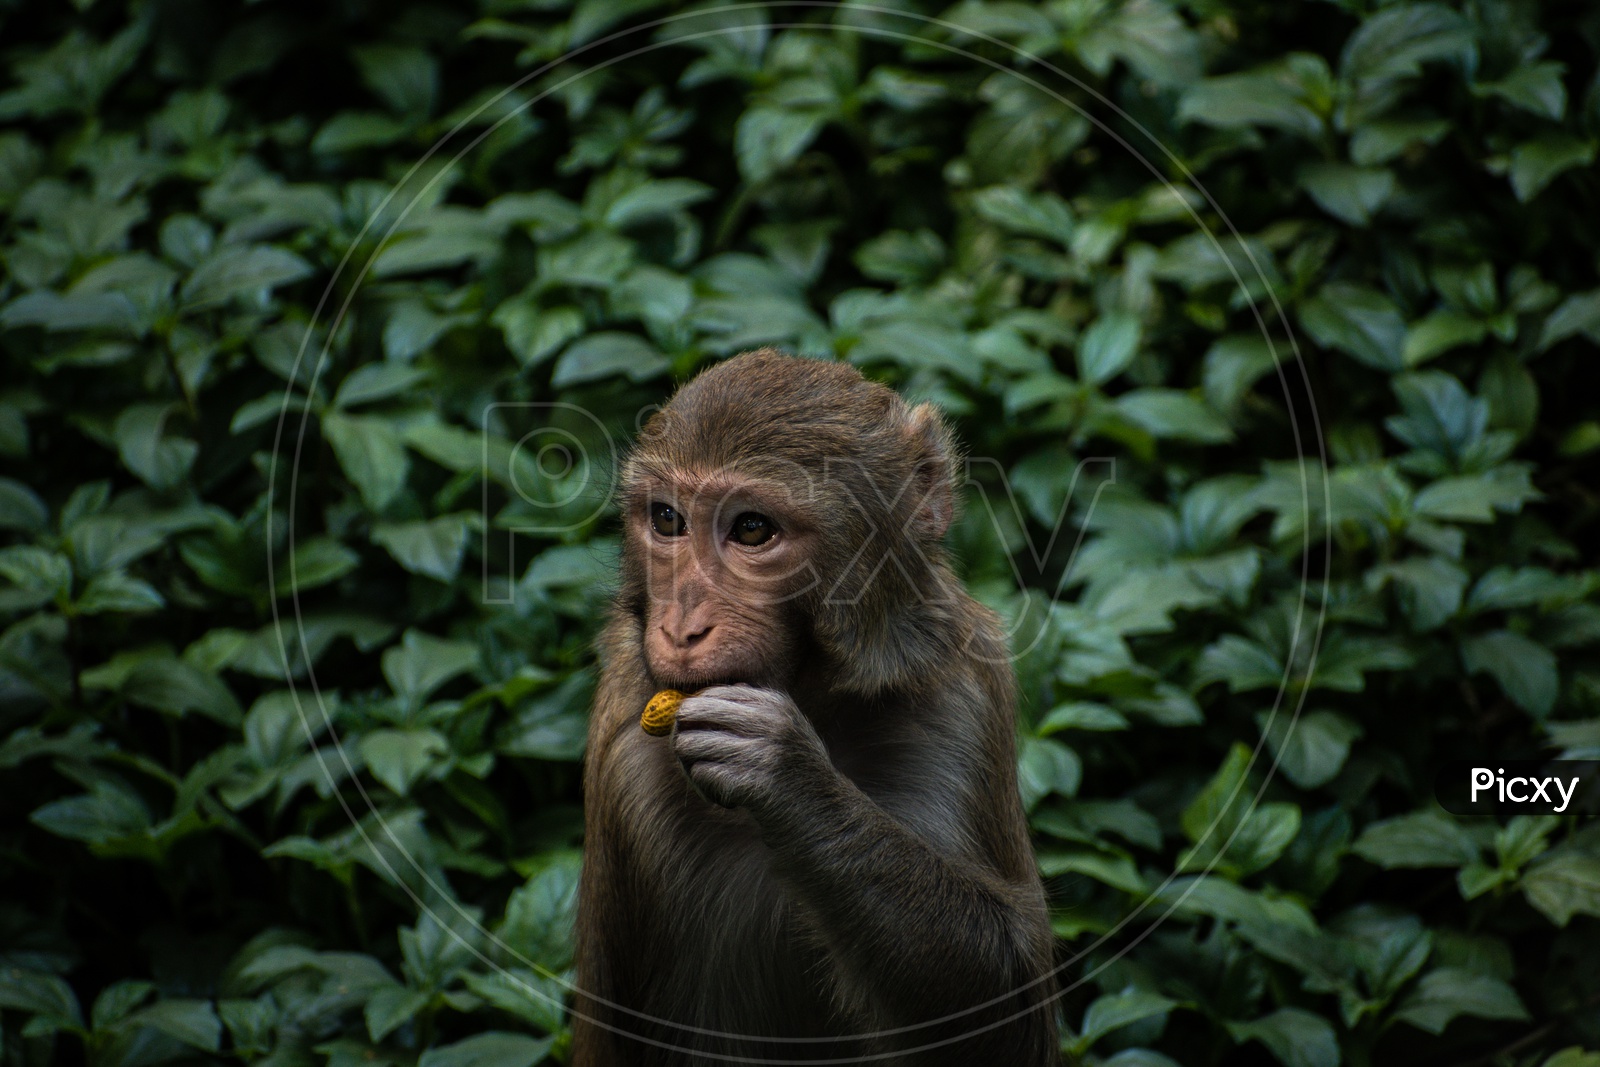 Minimal image of a monkey eating a peanut behind a very green background